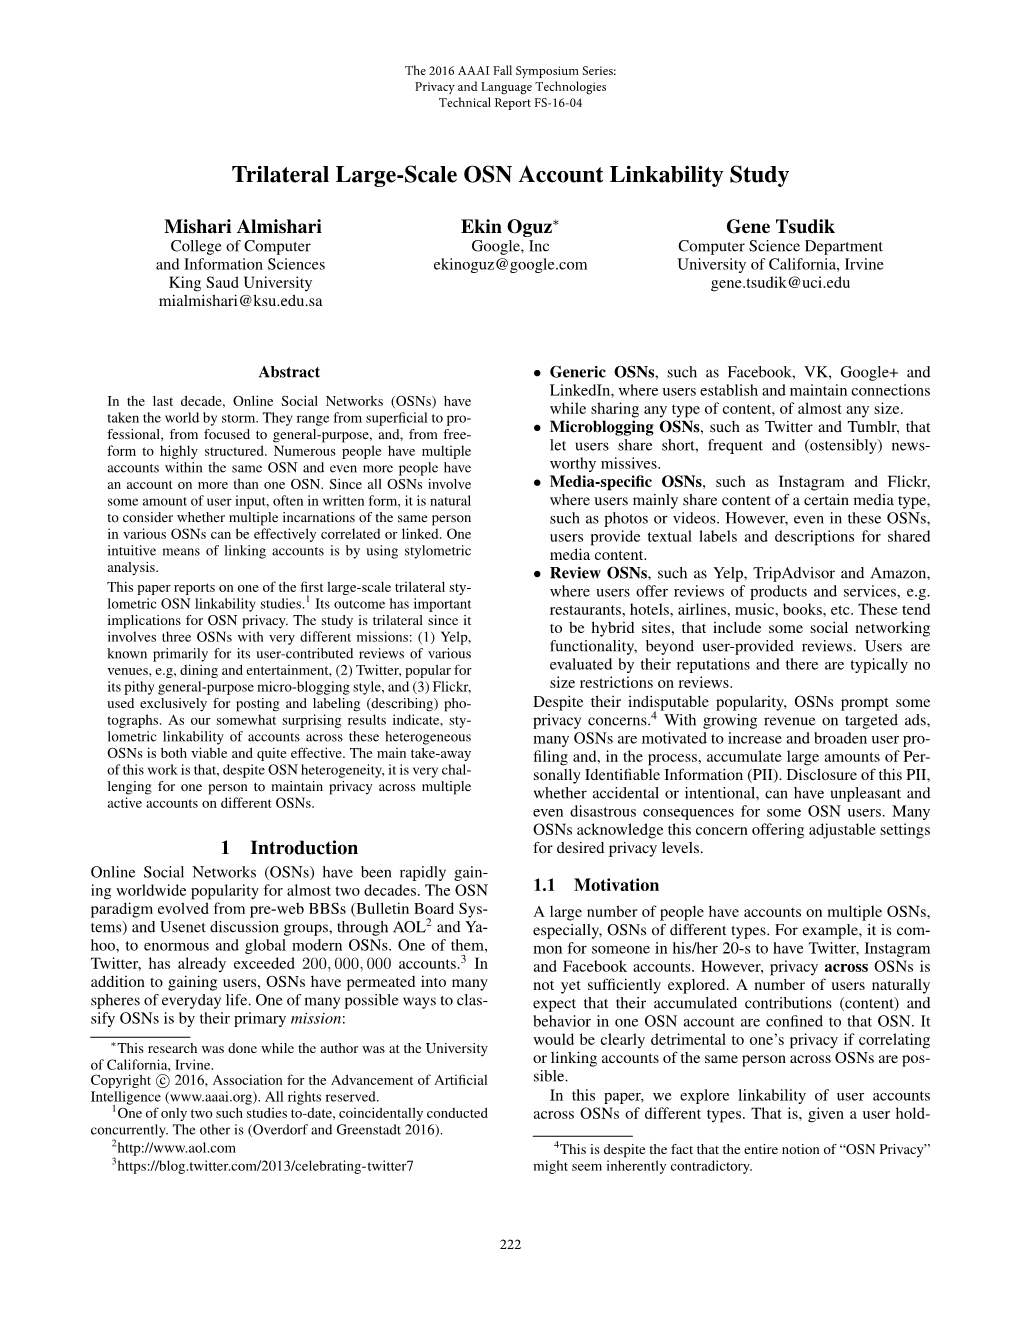 Trilateral Large-Scale OSN Account Linkability Study